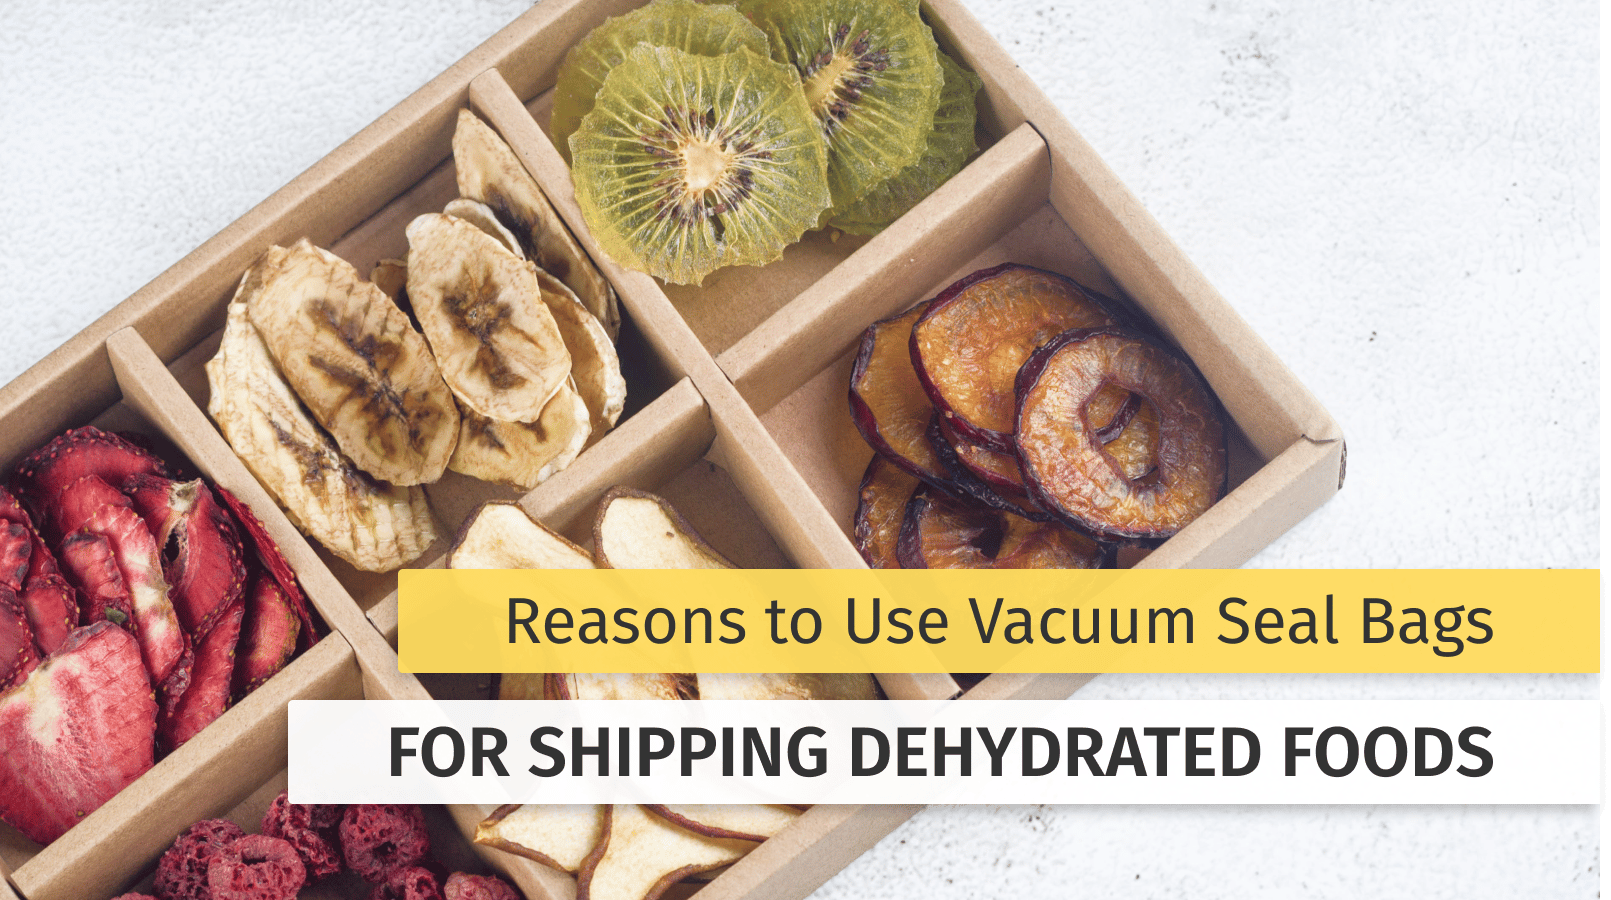 Reasons To Use Vacuum Seal Bags For Shipping Dehydrated Foods